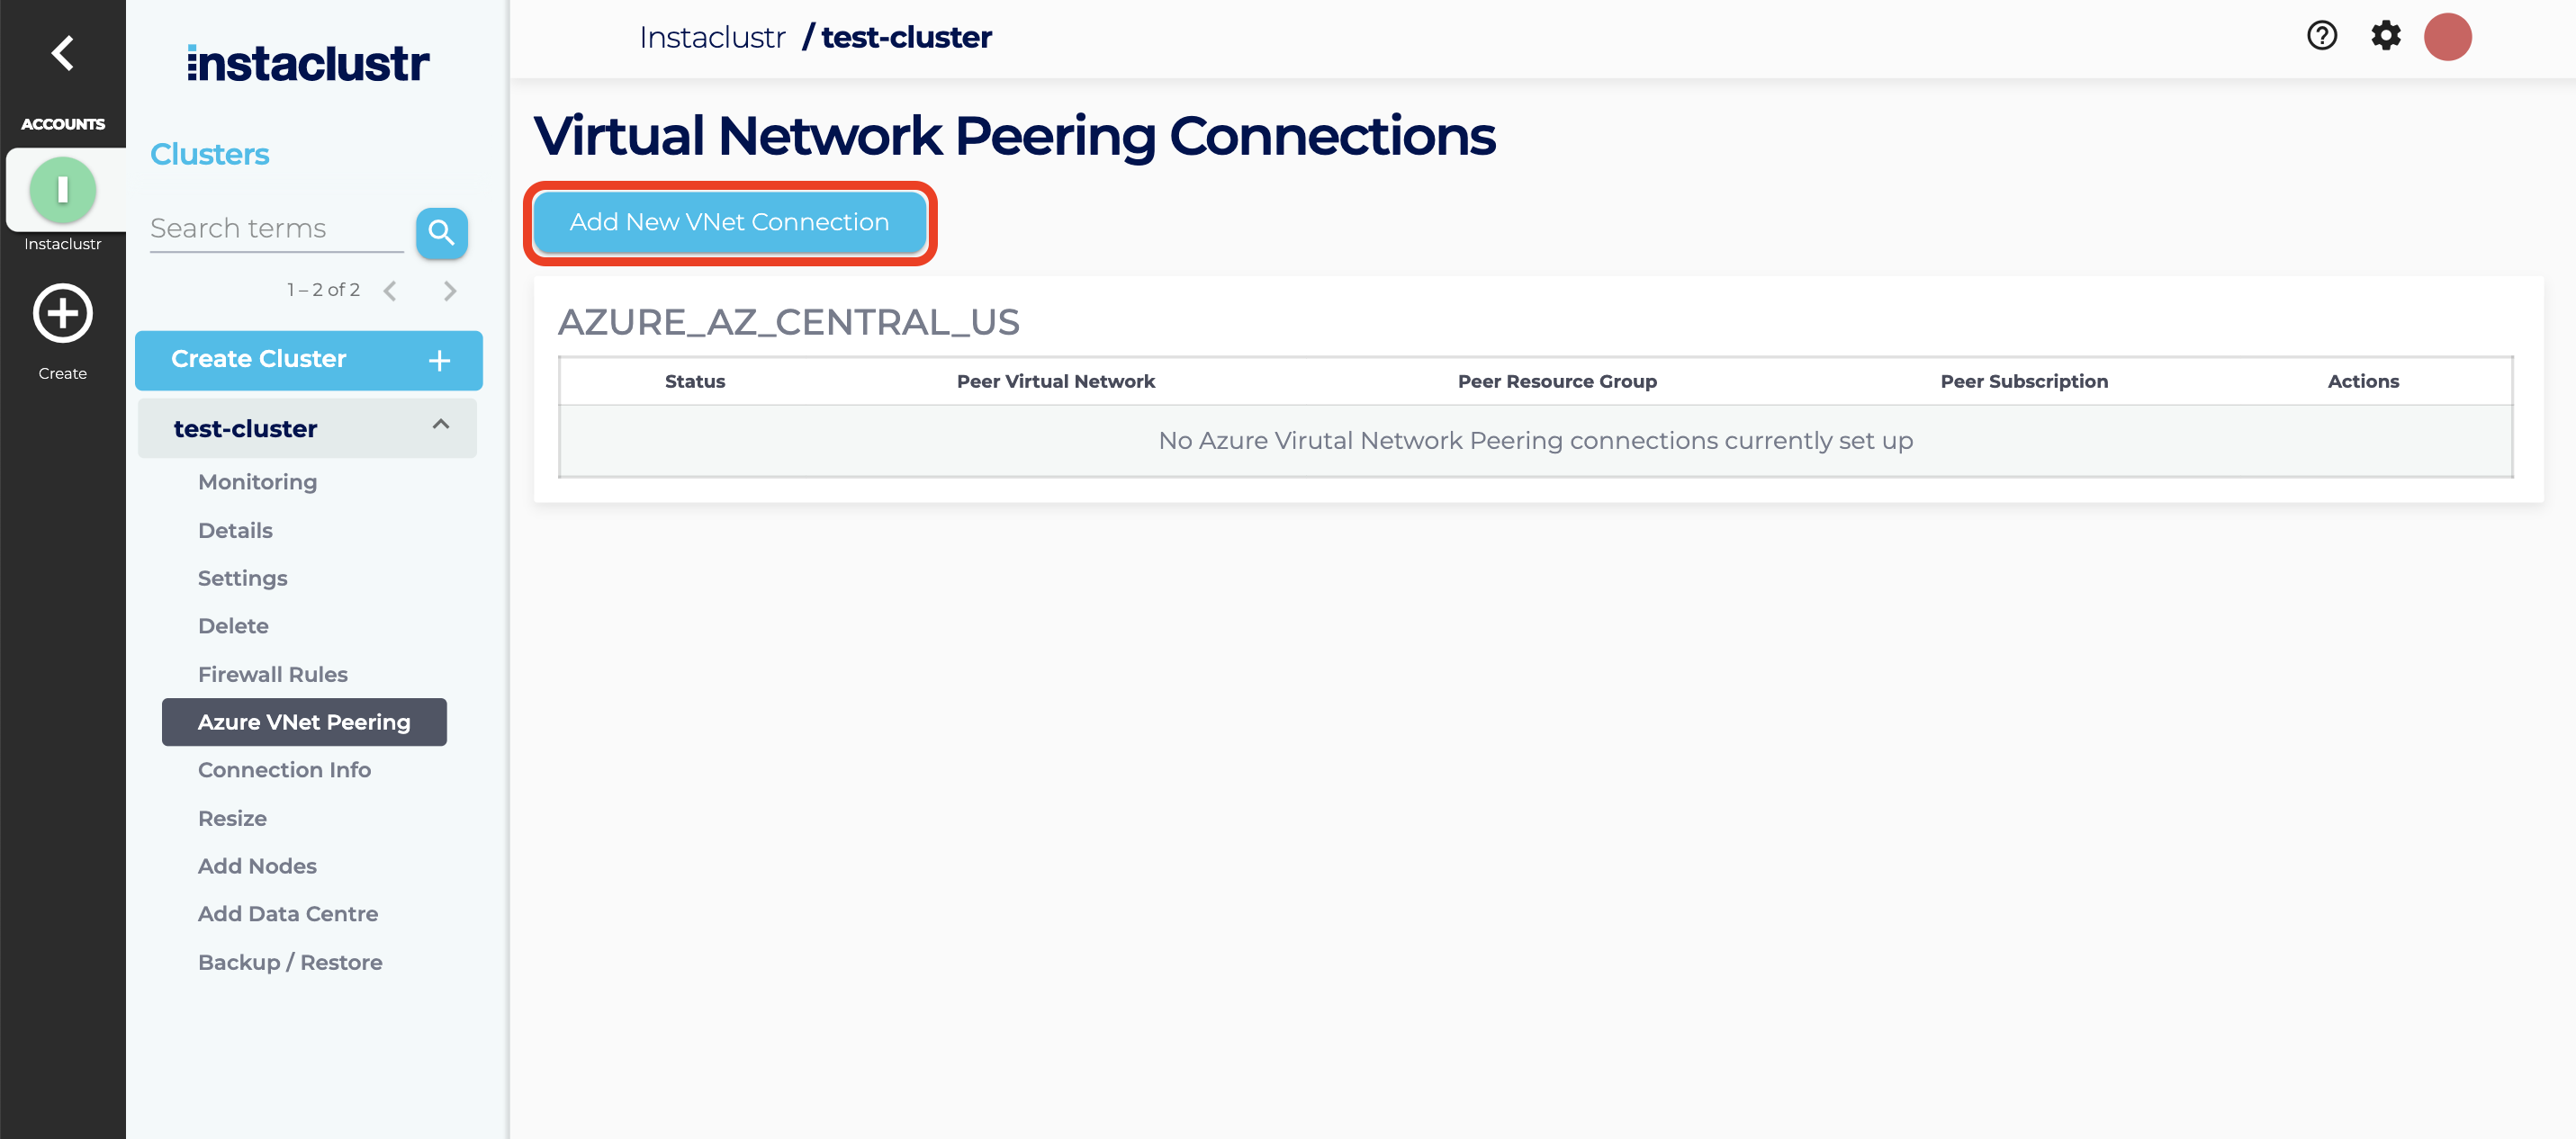 Select the button to create a new VNet connection.